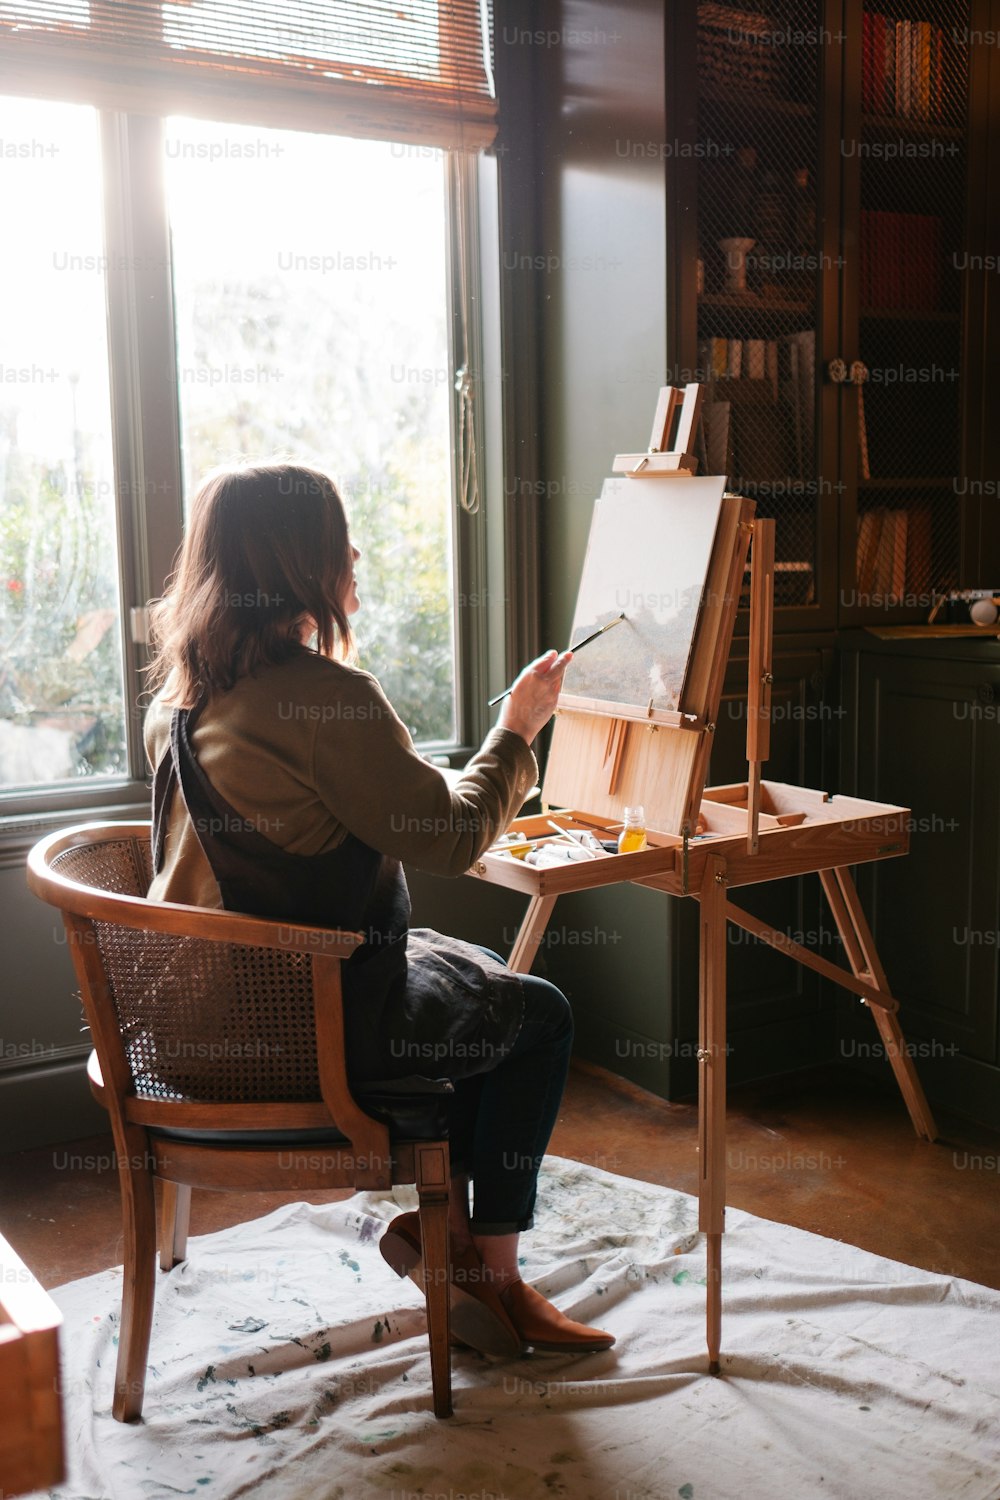 a woman sitting in a chair in front of a painting